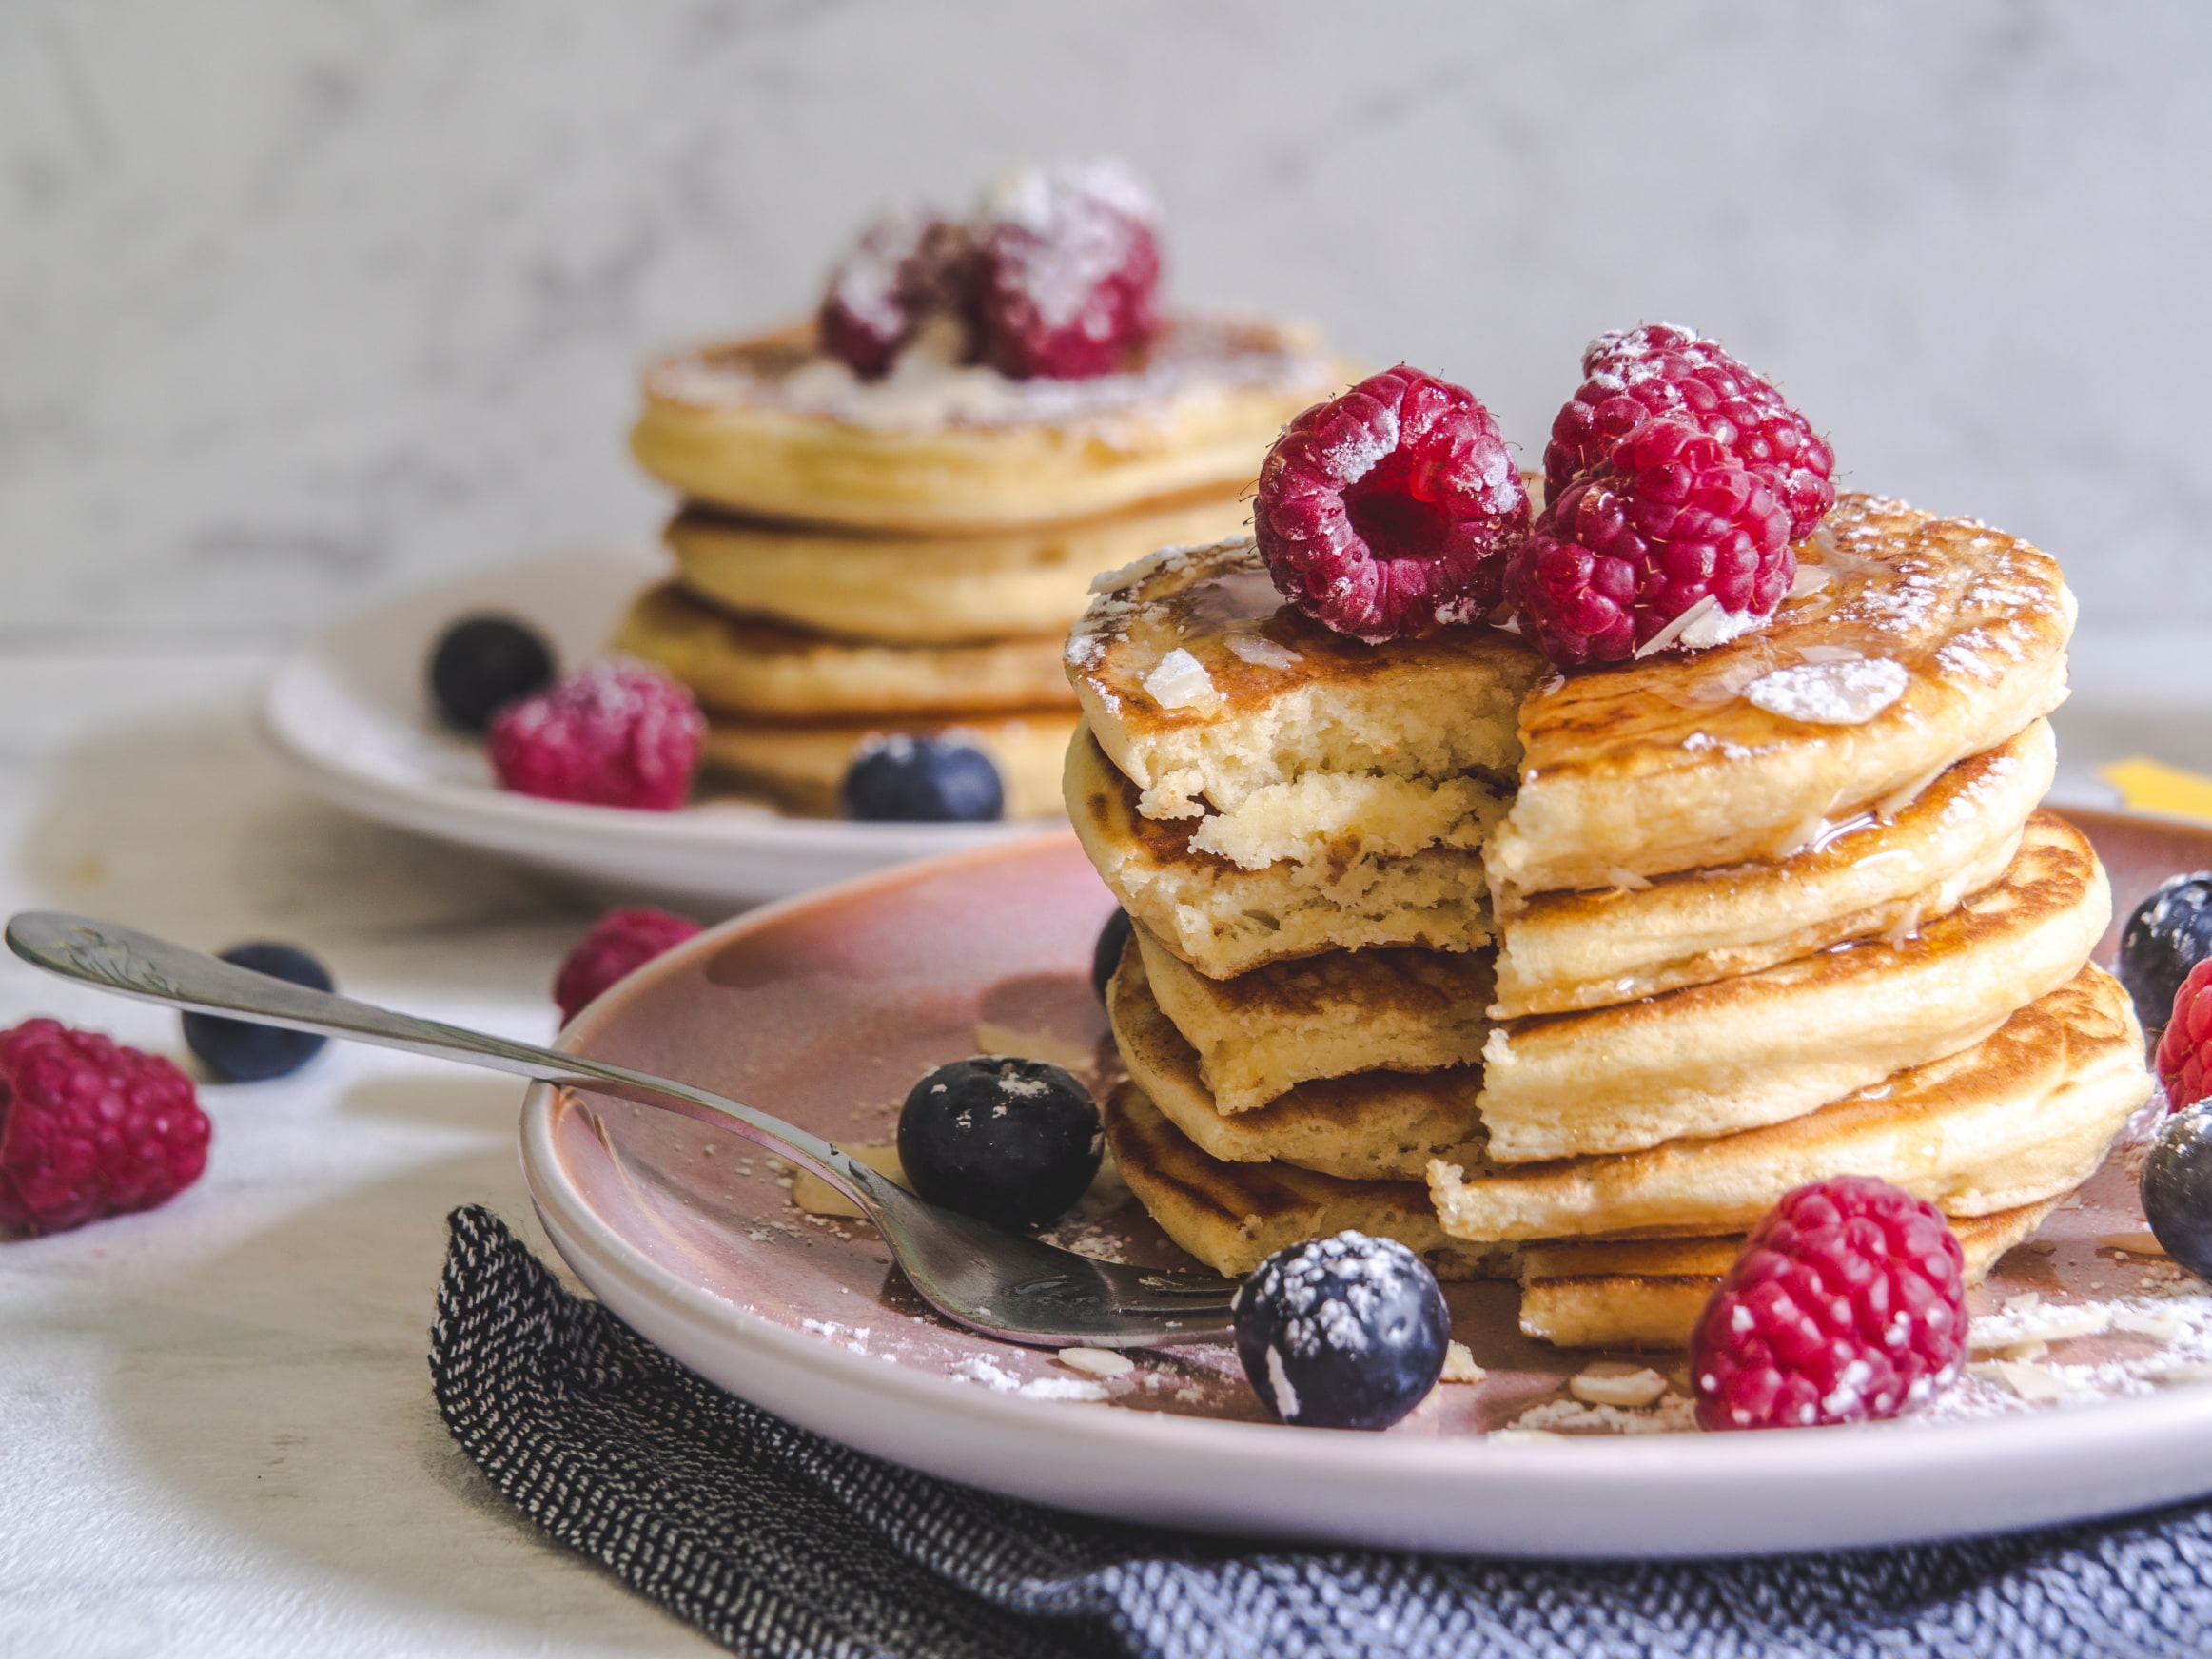 Where to eat pancakes in London